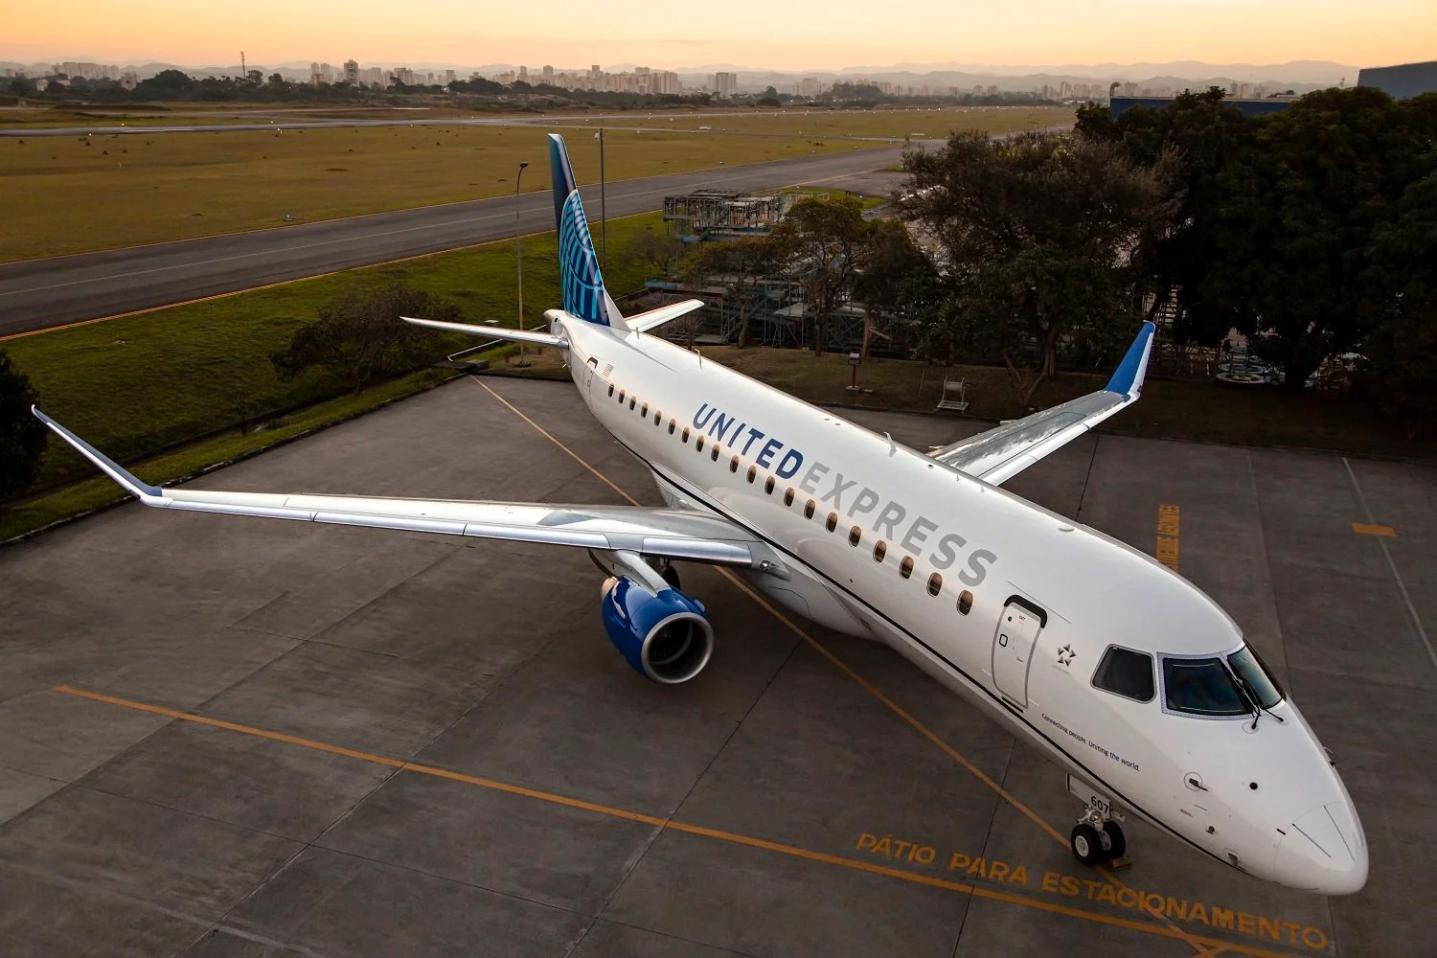 What Are the Maintenance and Operating Costs of Embraer Aircraft?